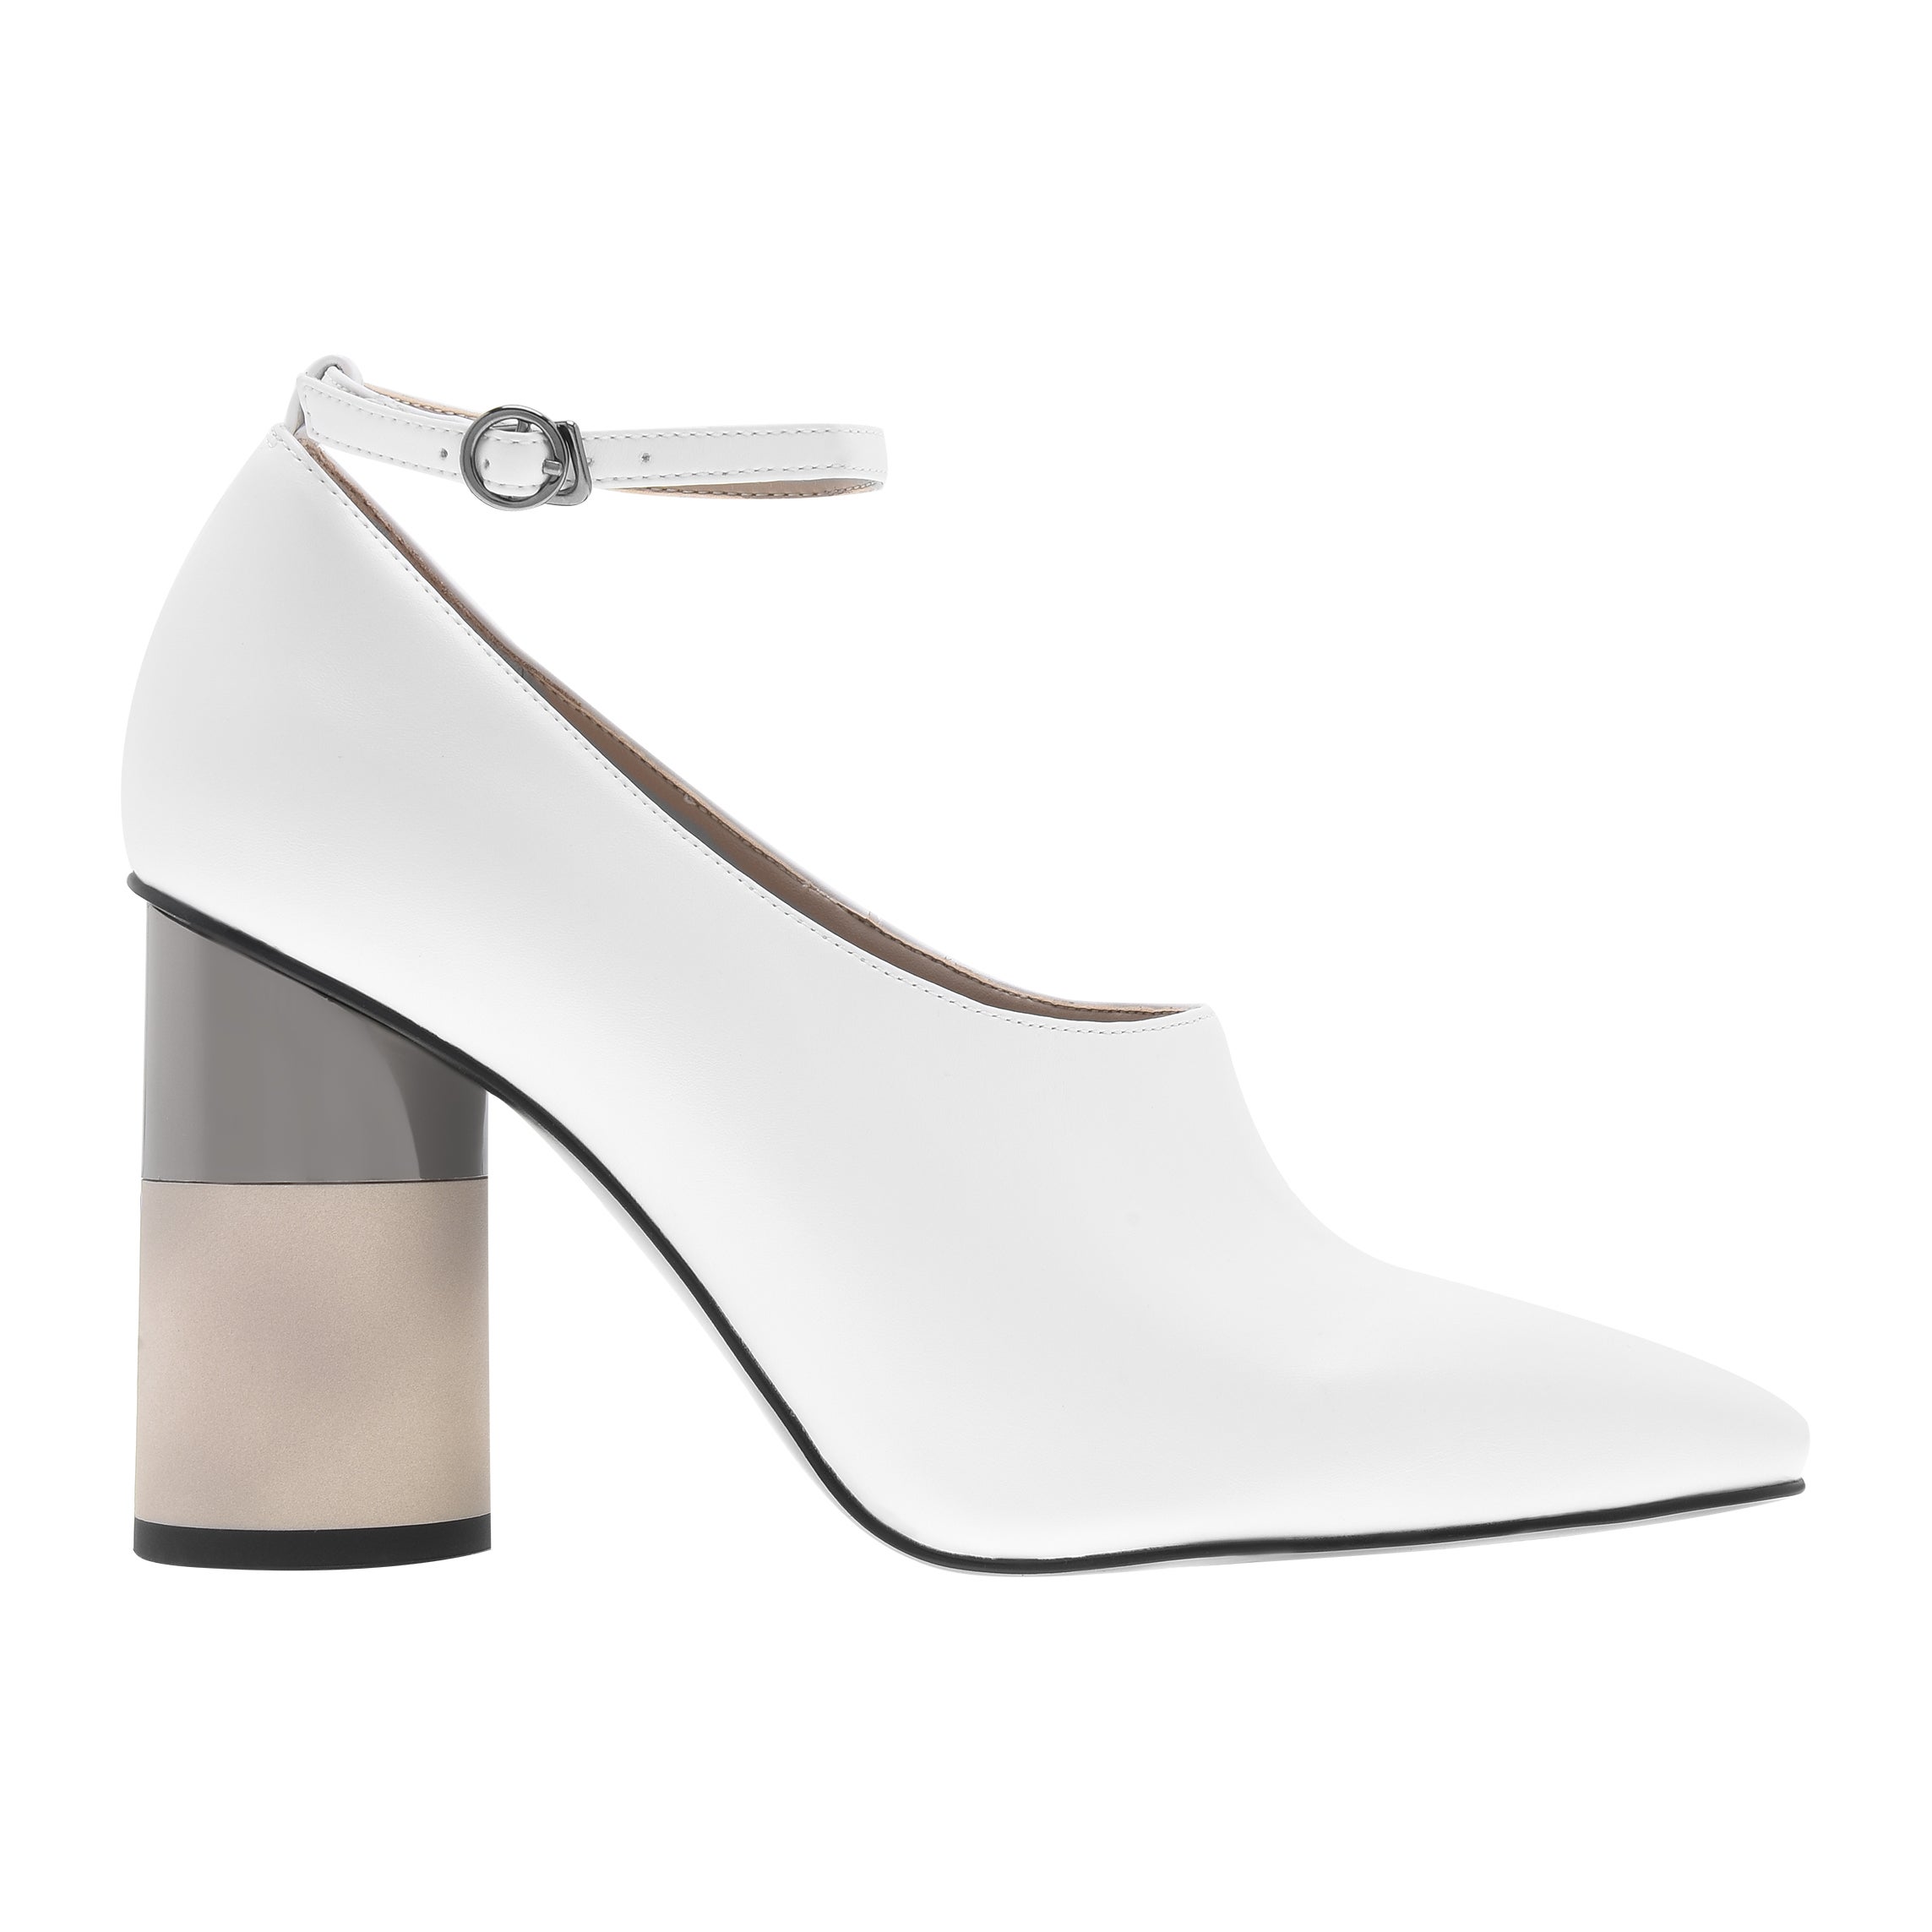 Charles & Keith + Ankle Strap Concrete Heel Court Shoes